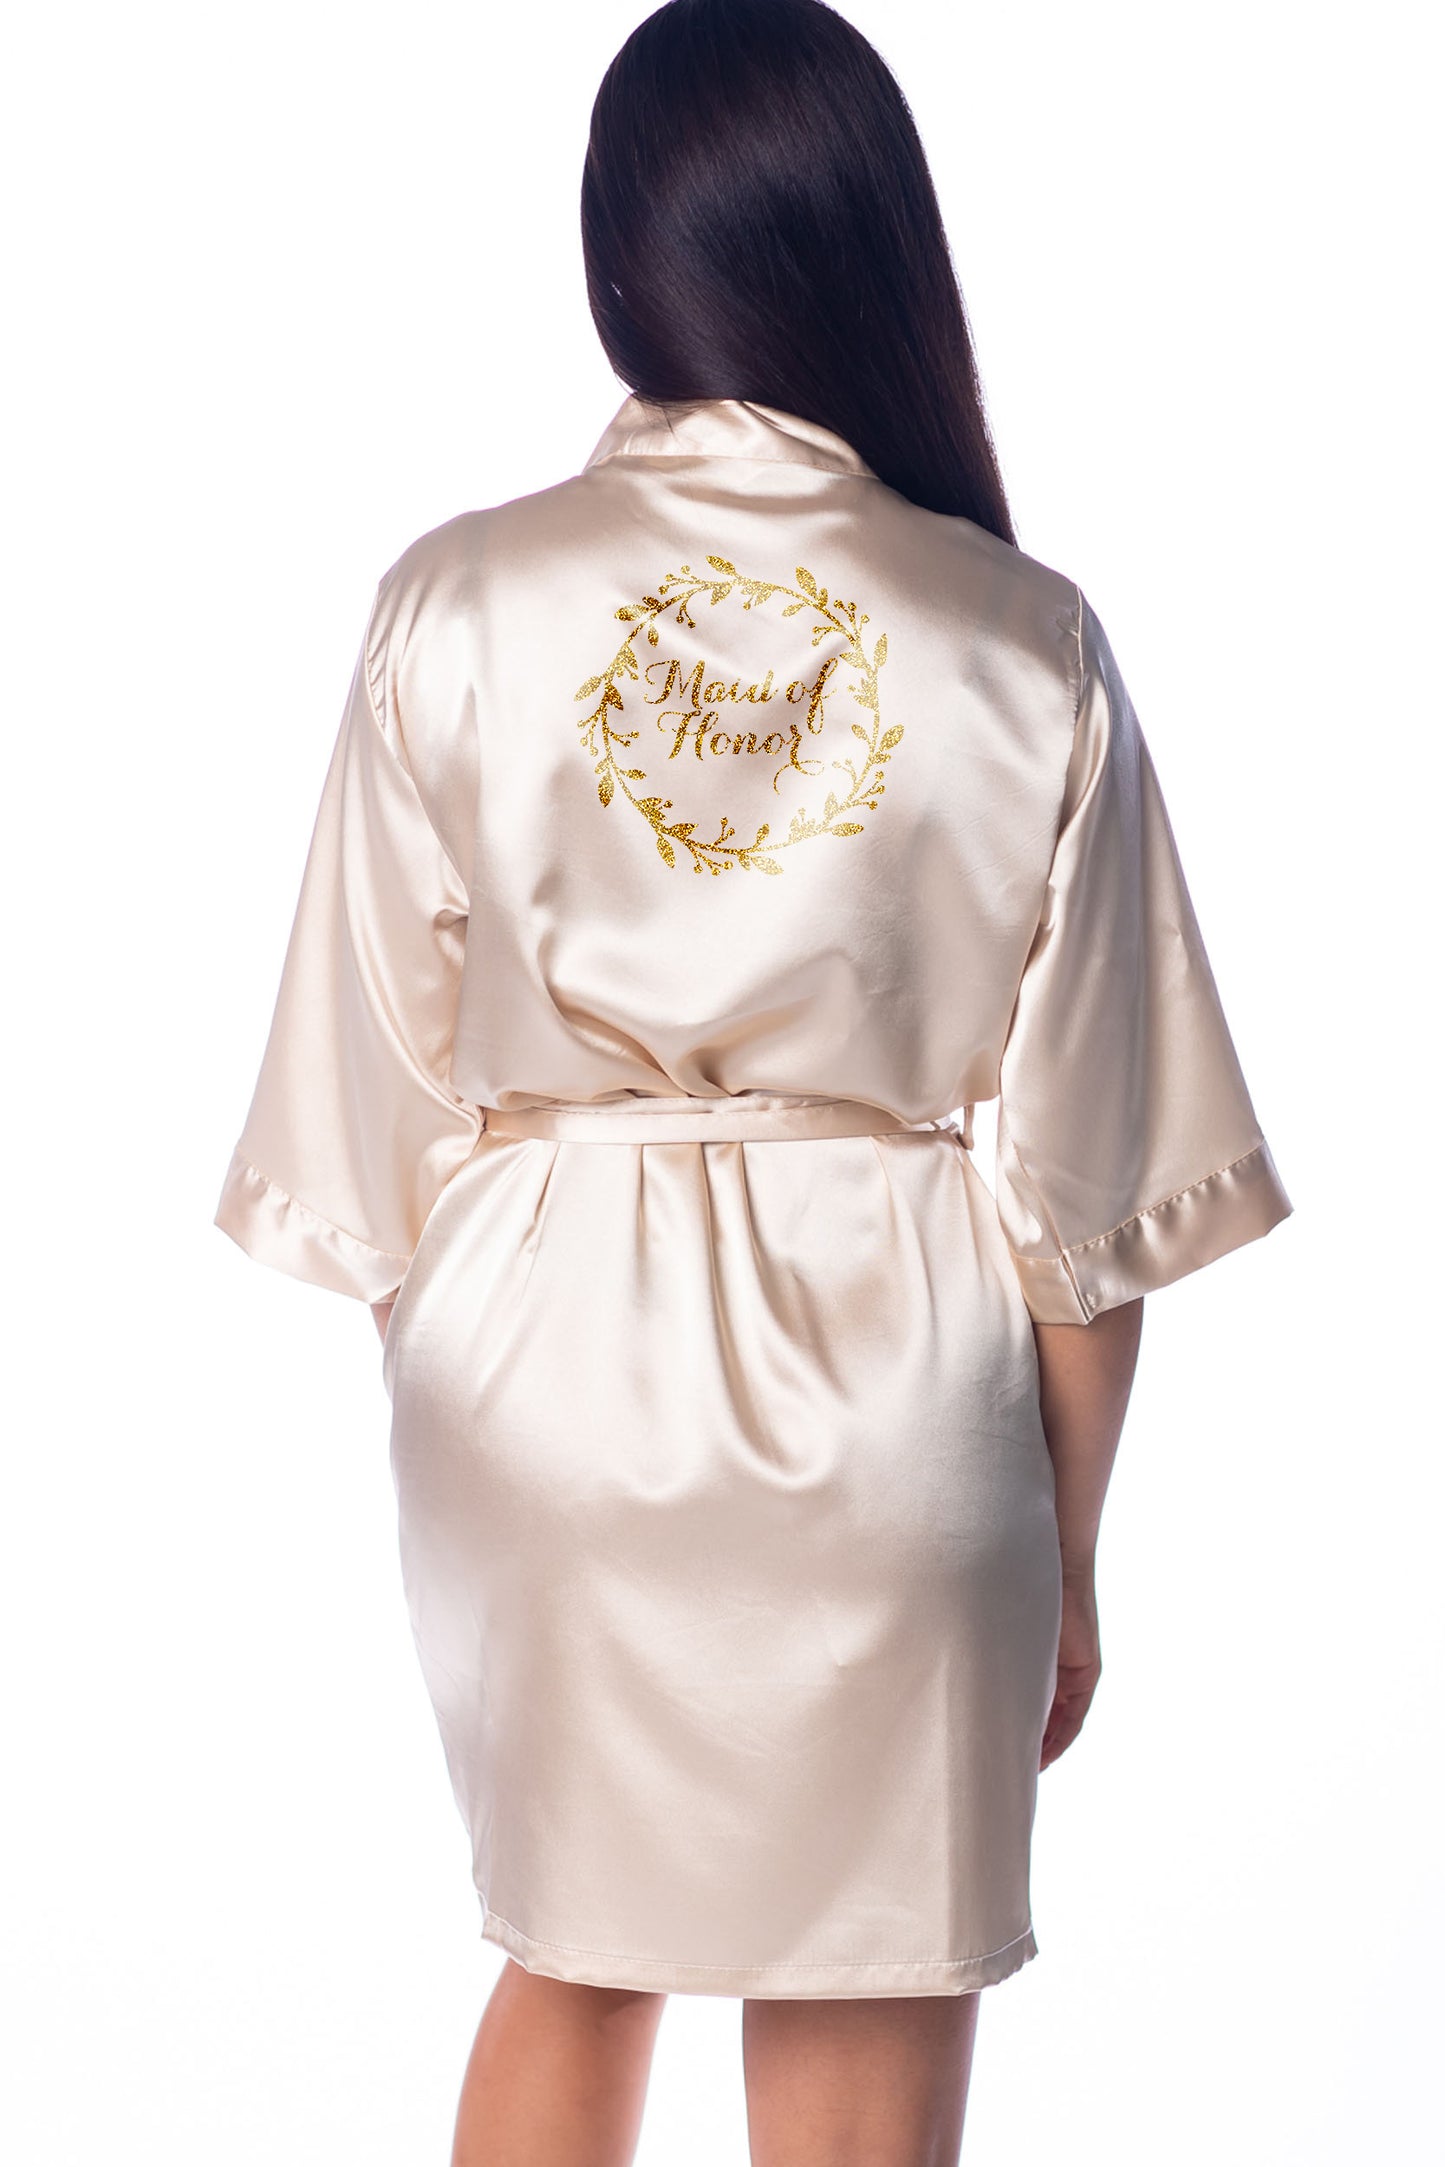 S/M "Maid of Honor" Champagne Satin Robe - Wreath in Gold Glitter (Clearance Item)